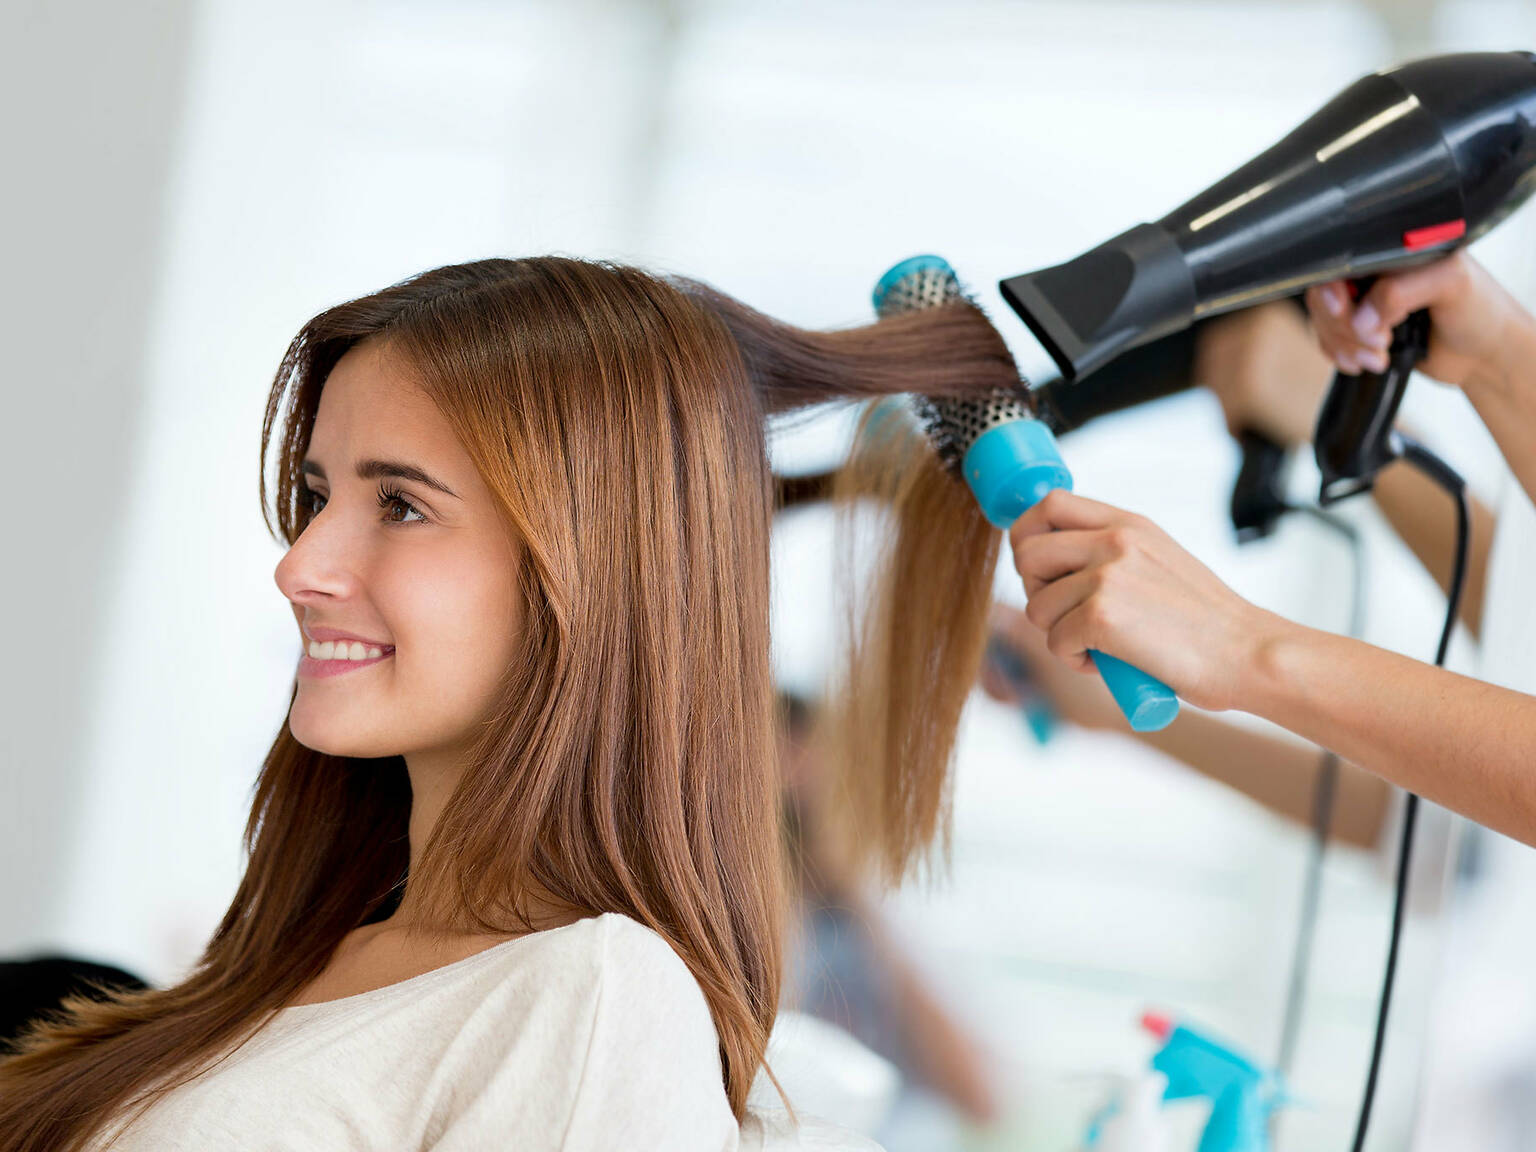 Find a blow dry bar in NYC for great hair styles